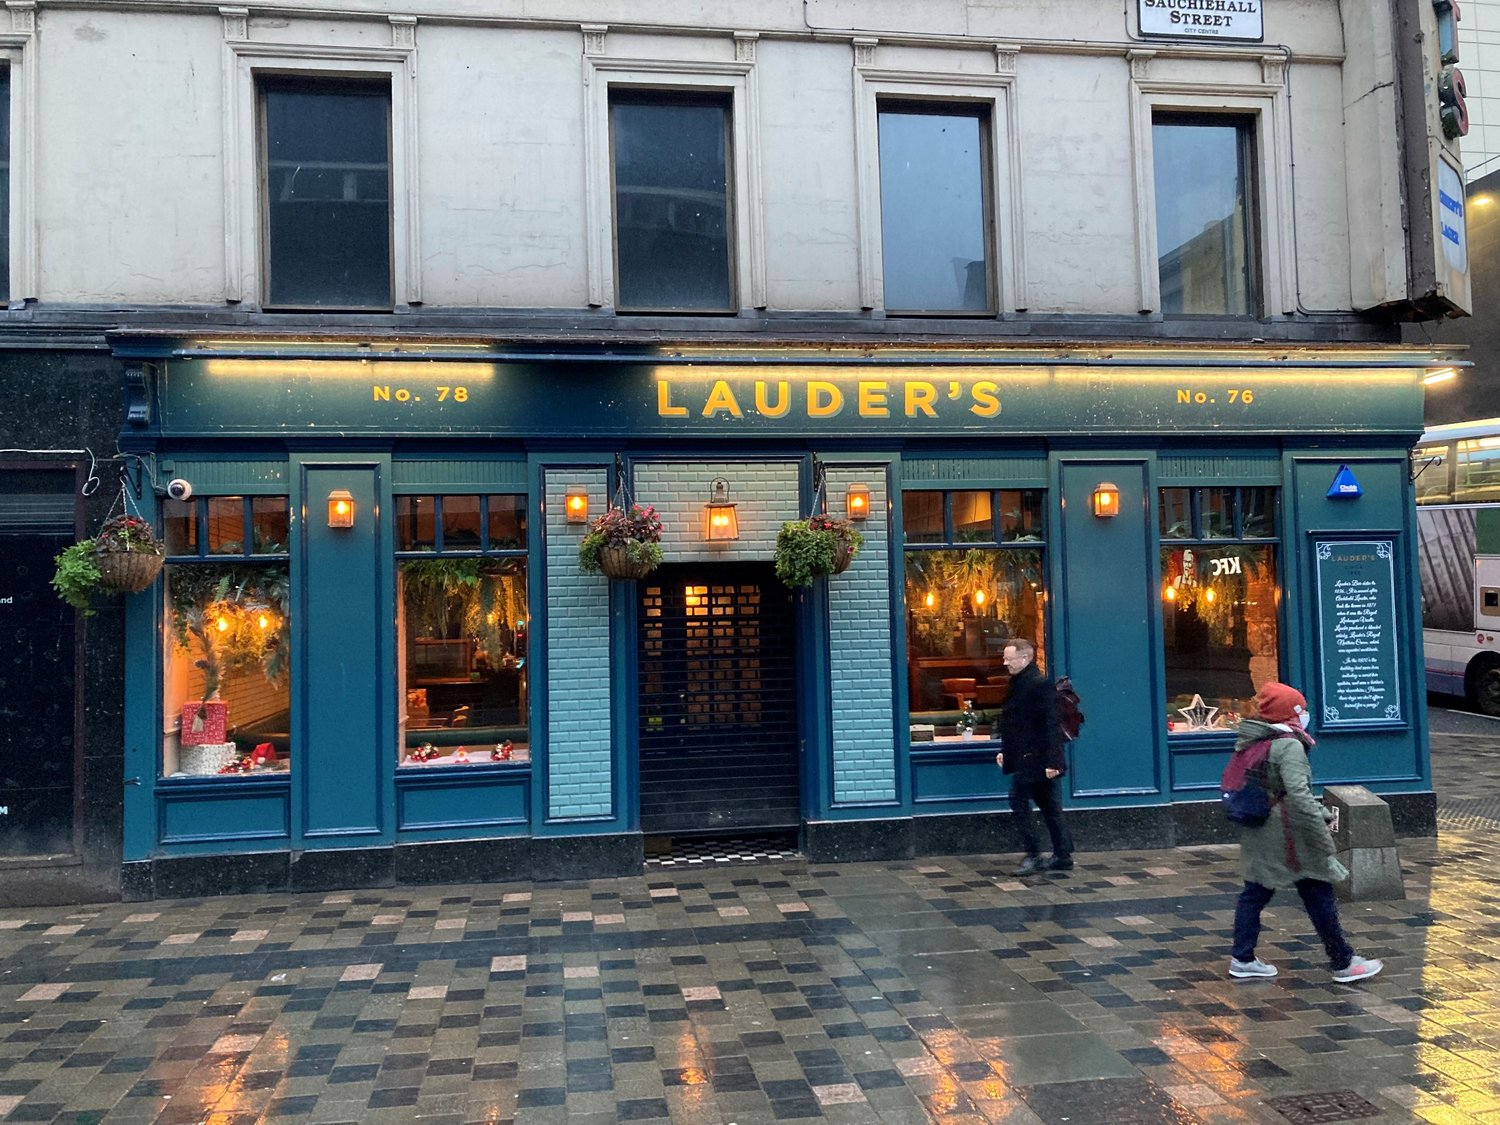 The Lauder,s pub, tidy and near symmetrical, resembles a set by filmmaker Wes Anderson.